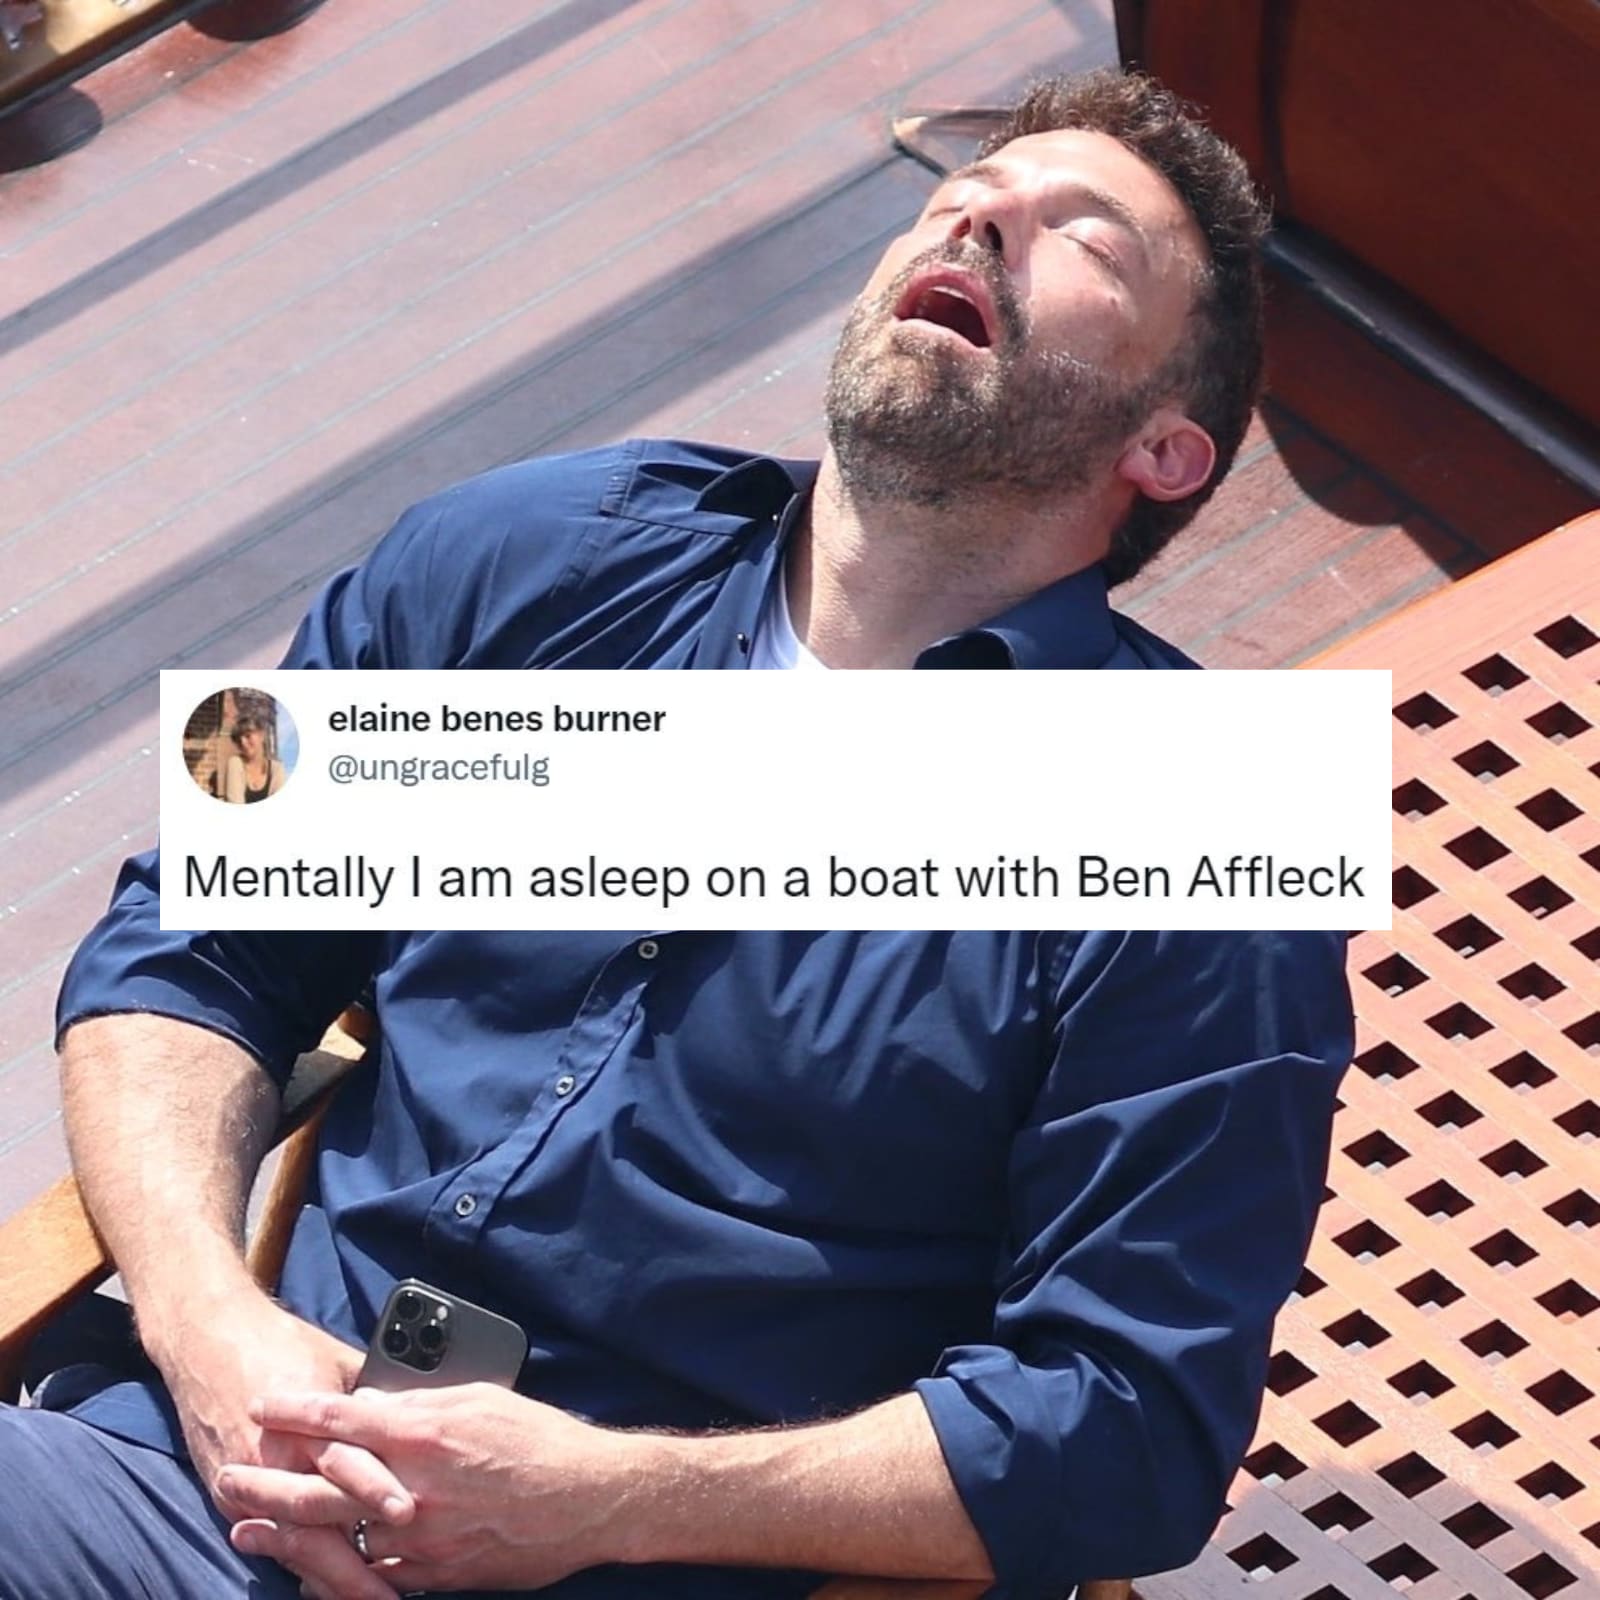 ben Ce405 Affleck B23c4 Fell F03ea Asleep E8135 On C770e Boat 4a6e9 During 4ac34 Honeymoon 7eca0 With   Jlo   And   Became   An   Instant   Meme